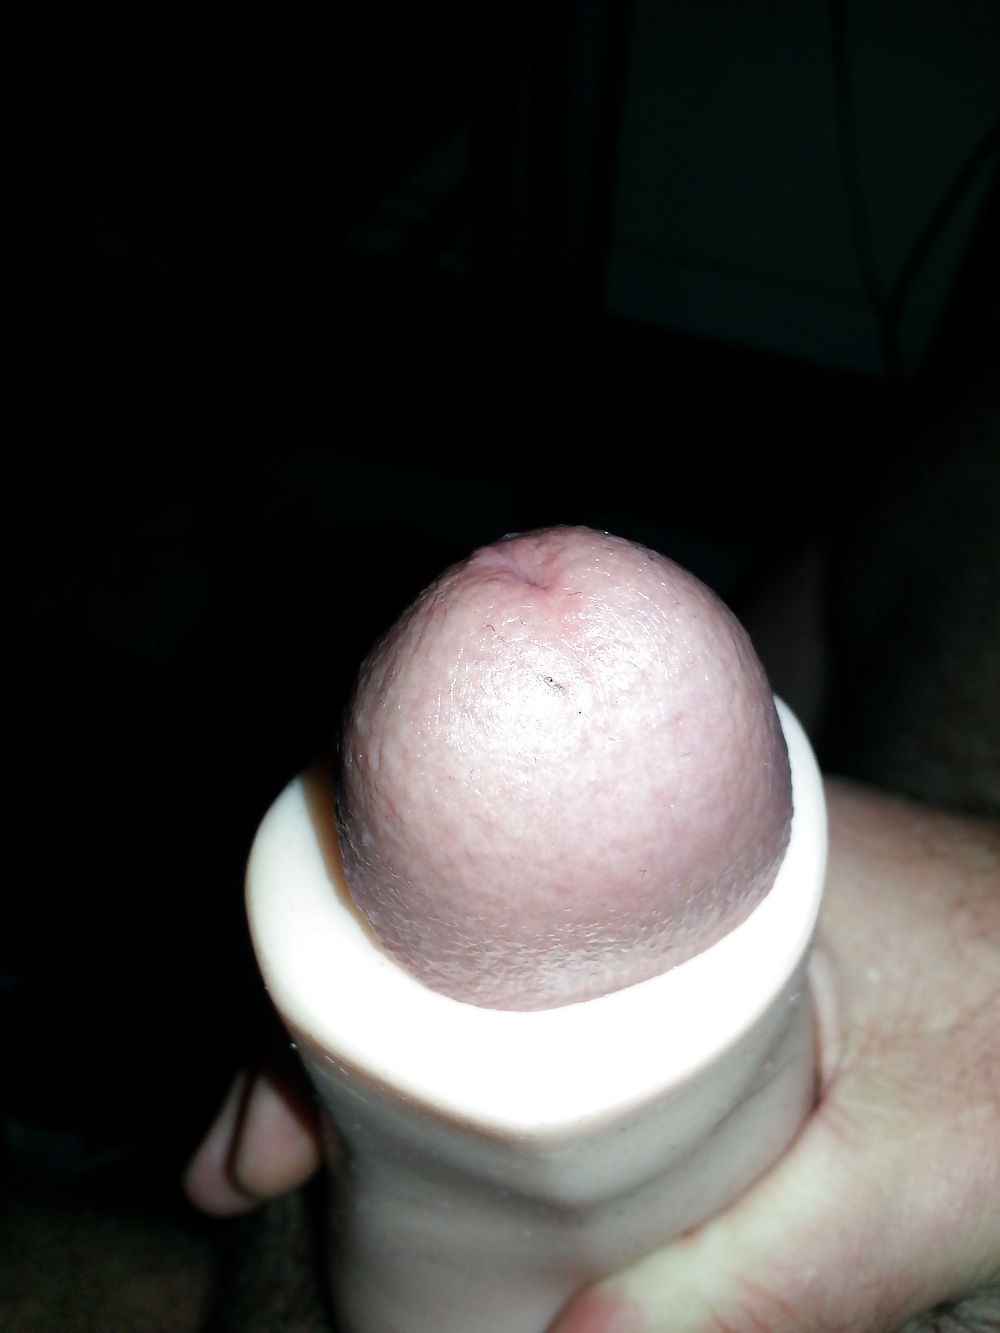 Using some of my sex toys #23779571